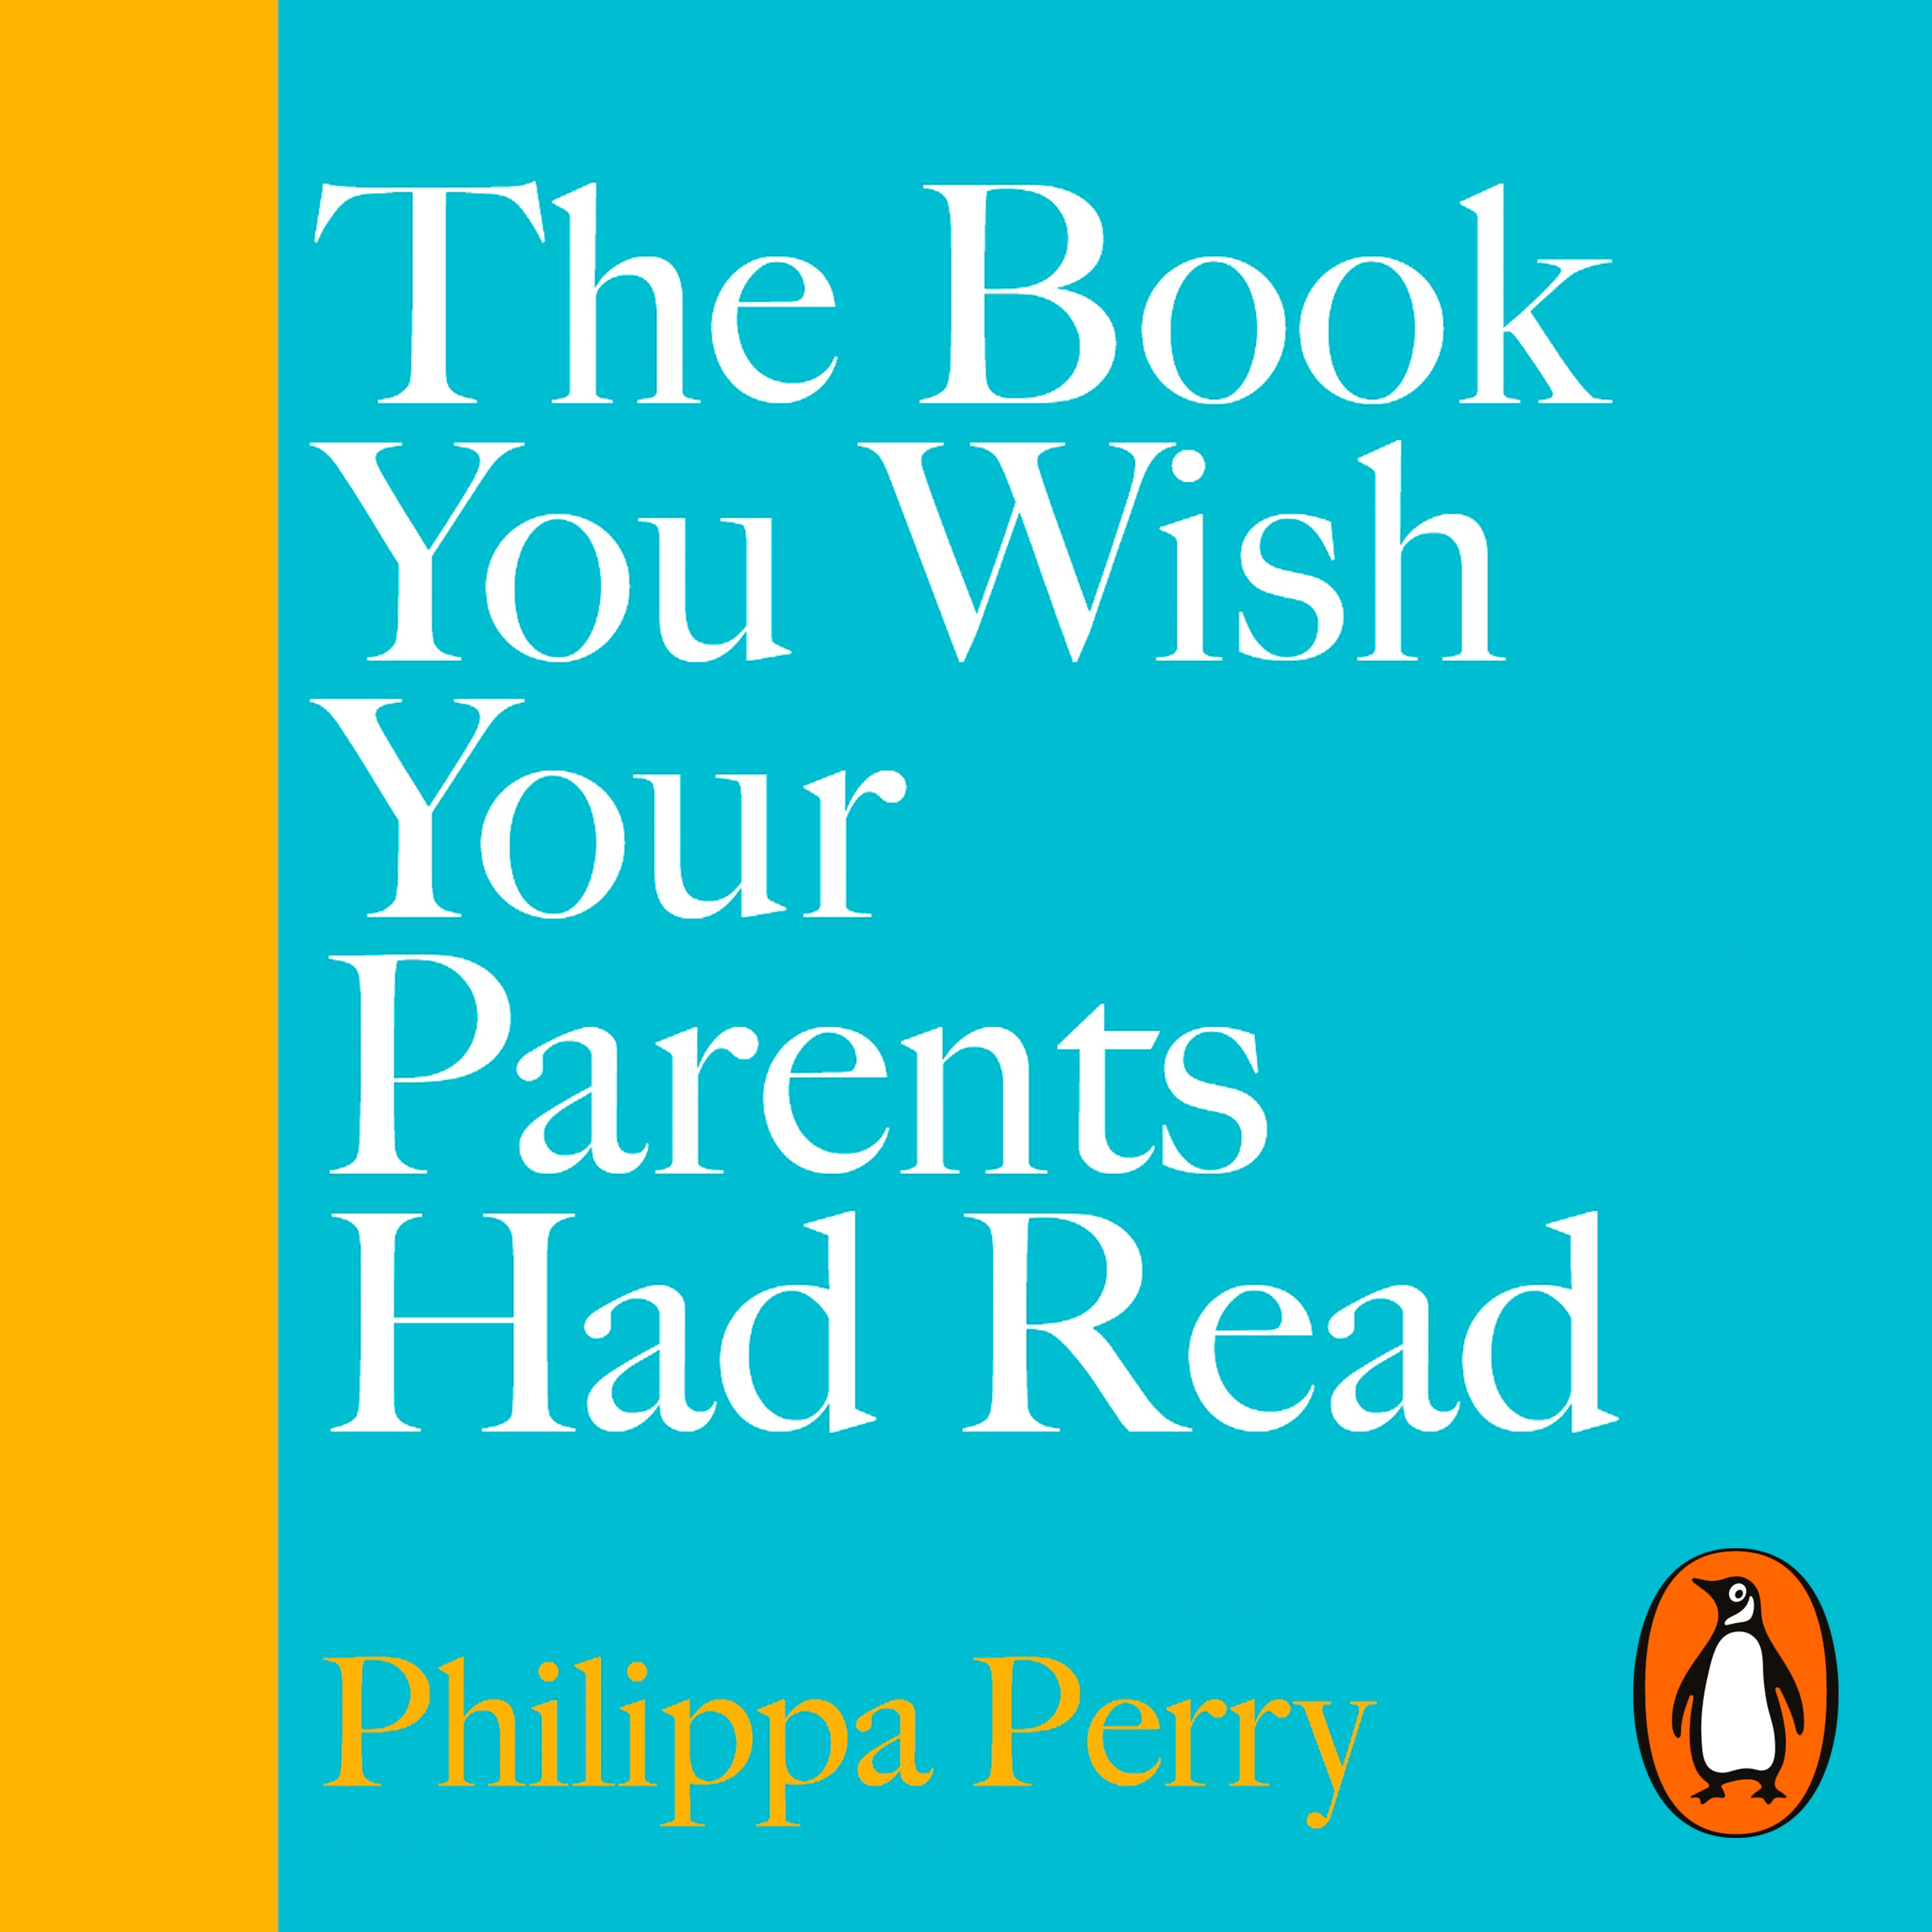 Audiobook image for The Book You Wish Your Parents Had Read: Bright blue background with a yellow stripe down the left side. Title in stacked in white font across the cover, and the author's name in yellow at the bottom.